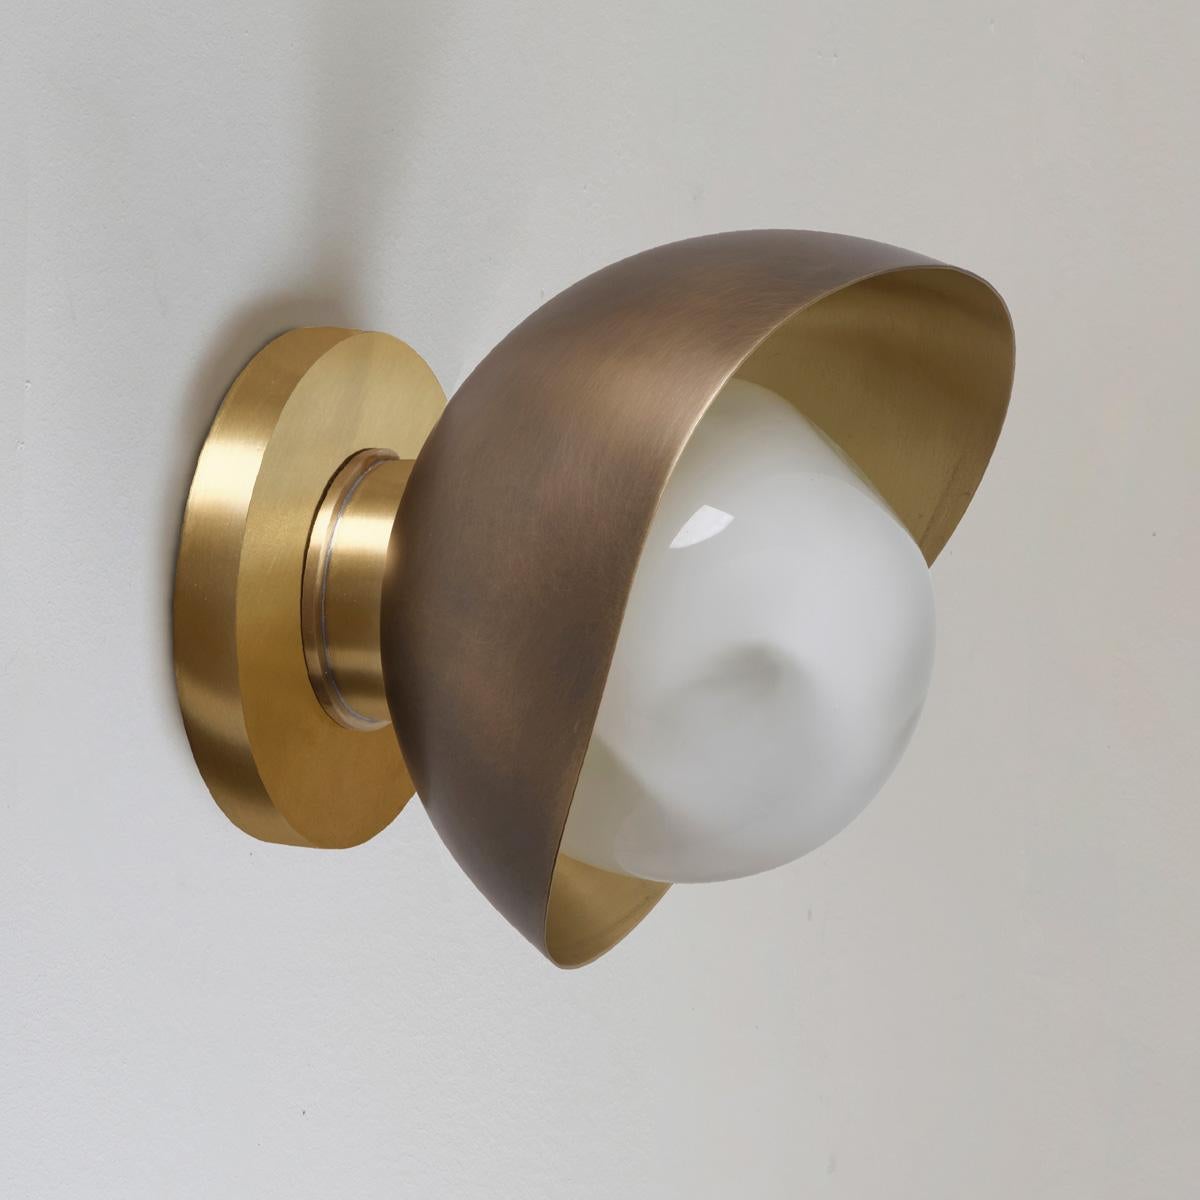 Italian Perla Mini Wall Light by Gaspare Asaro. Black and Polished Brass Finish For Sale